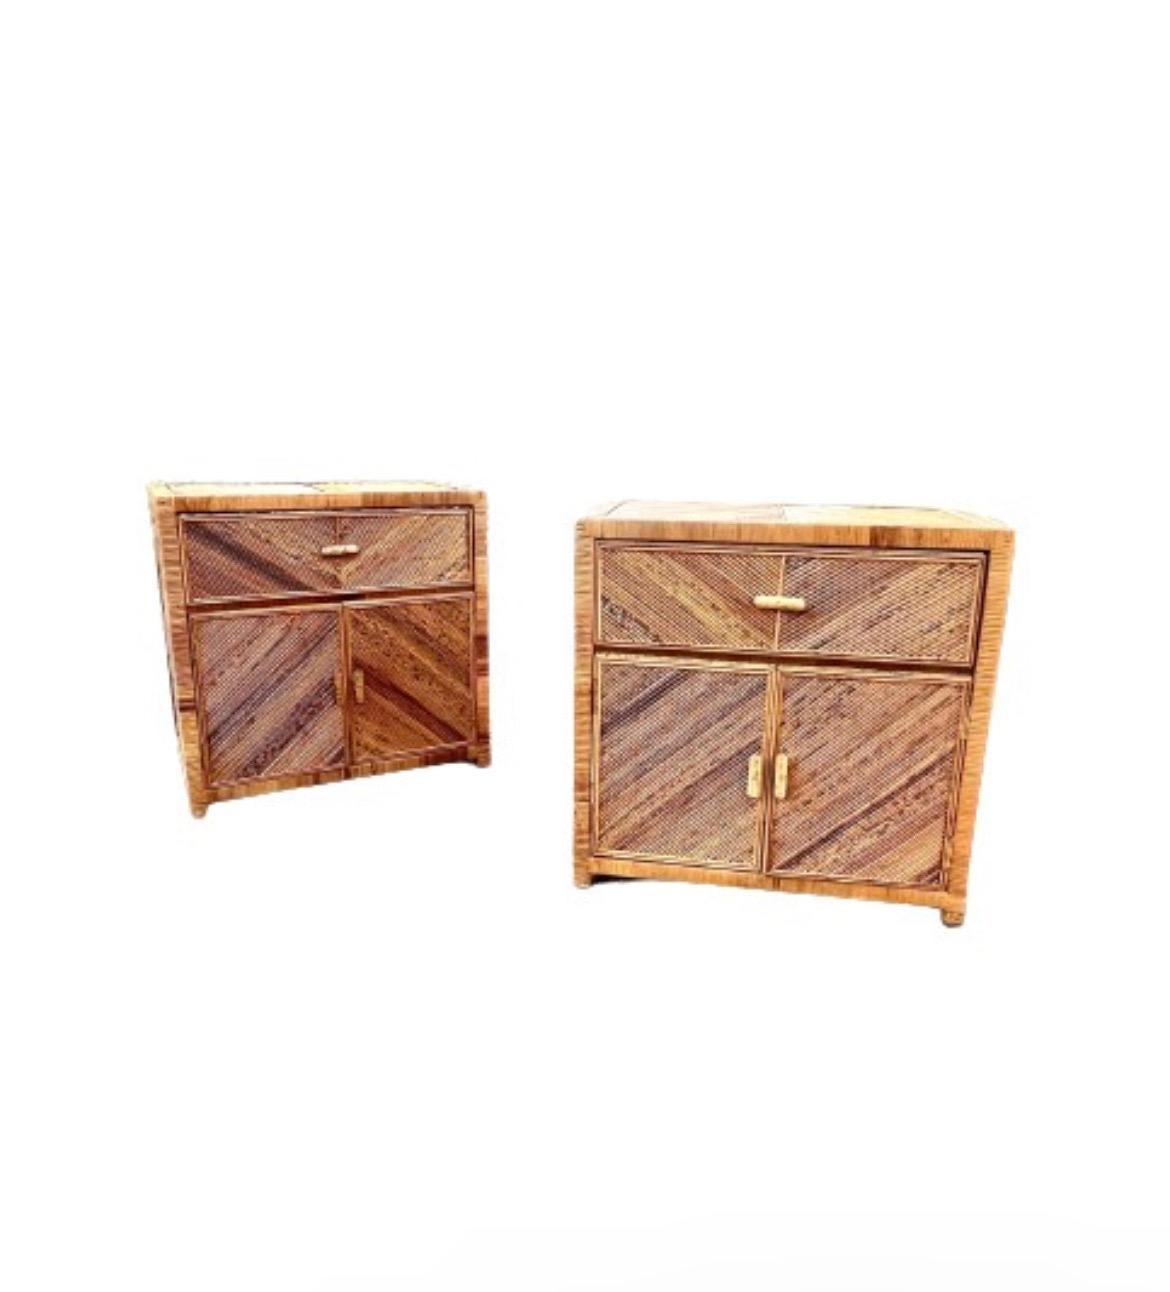 Striking Pair of Textural Bamboo and Cane Marquetry Commodes, circa 1975 For Sale 12